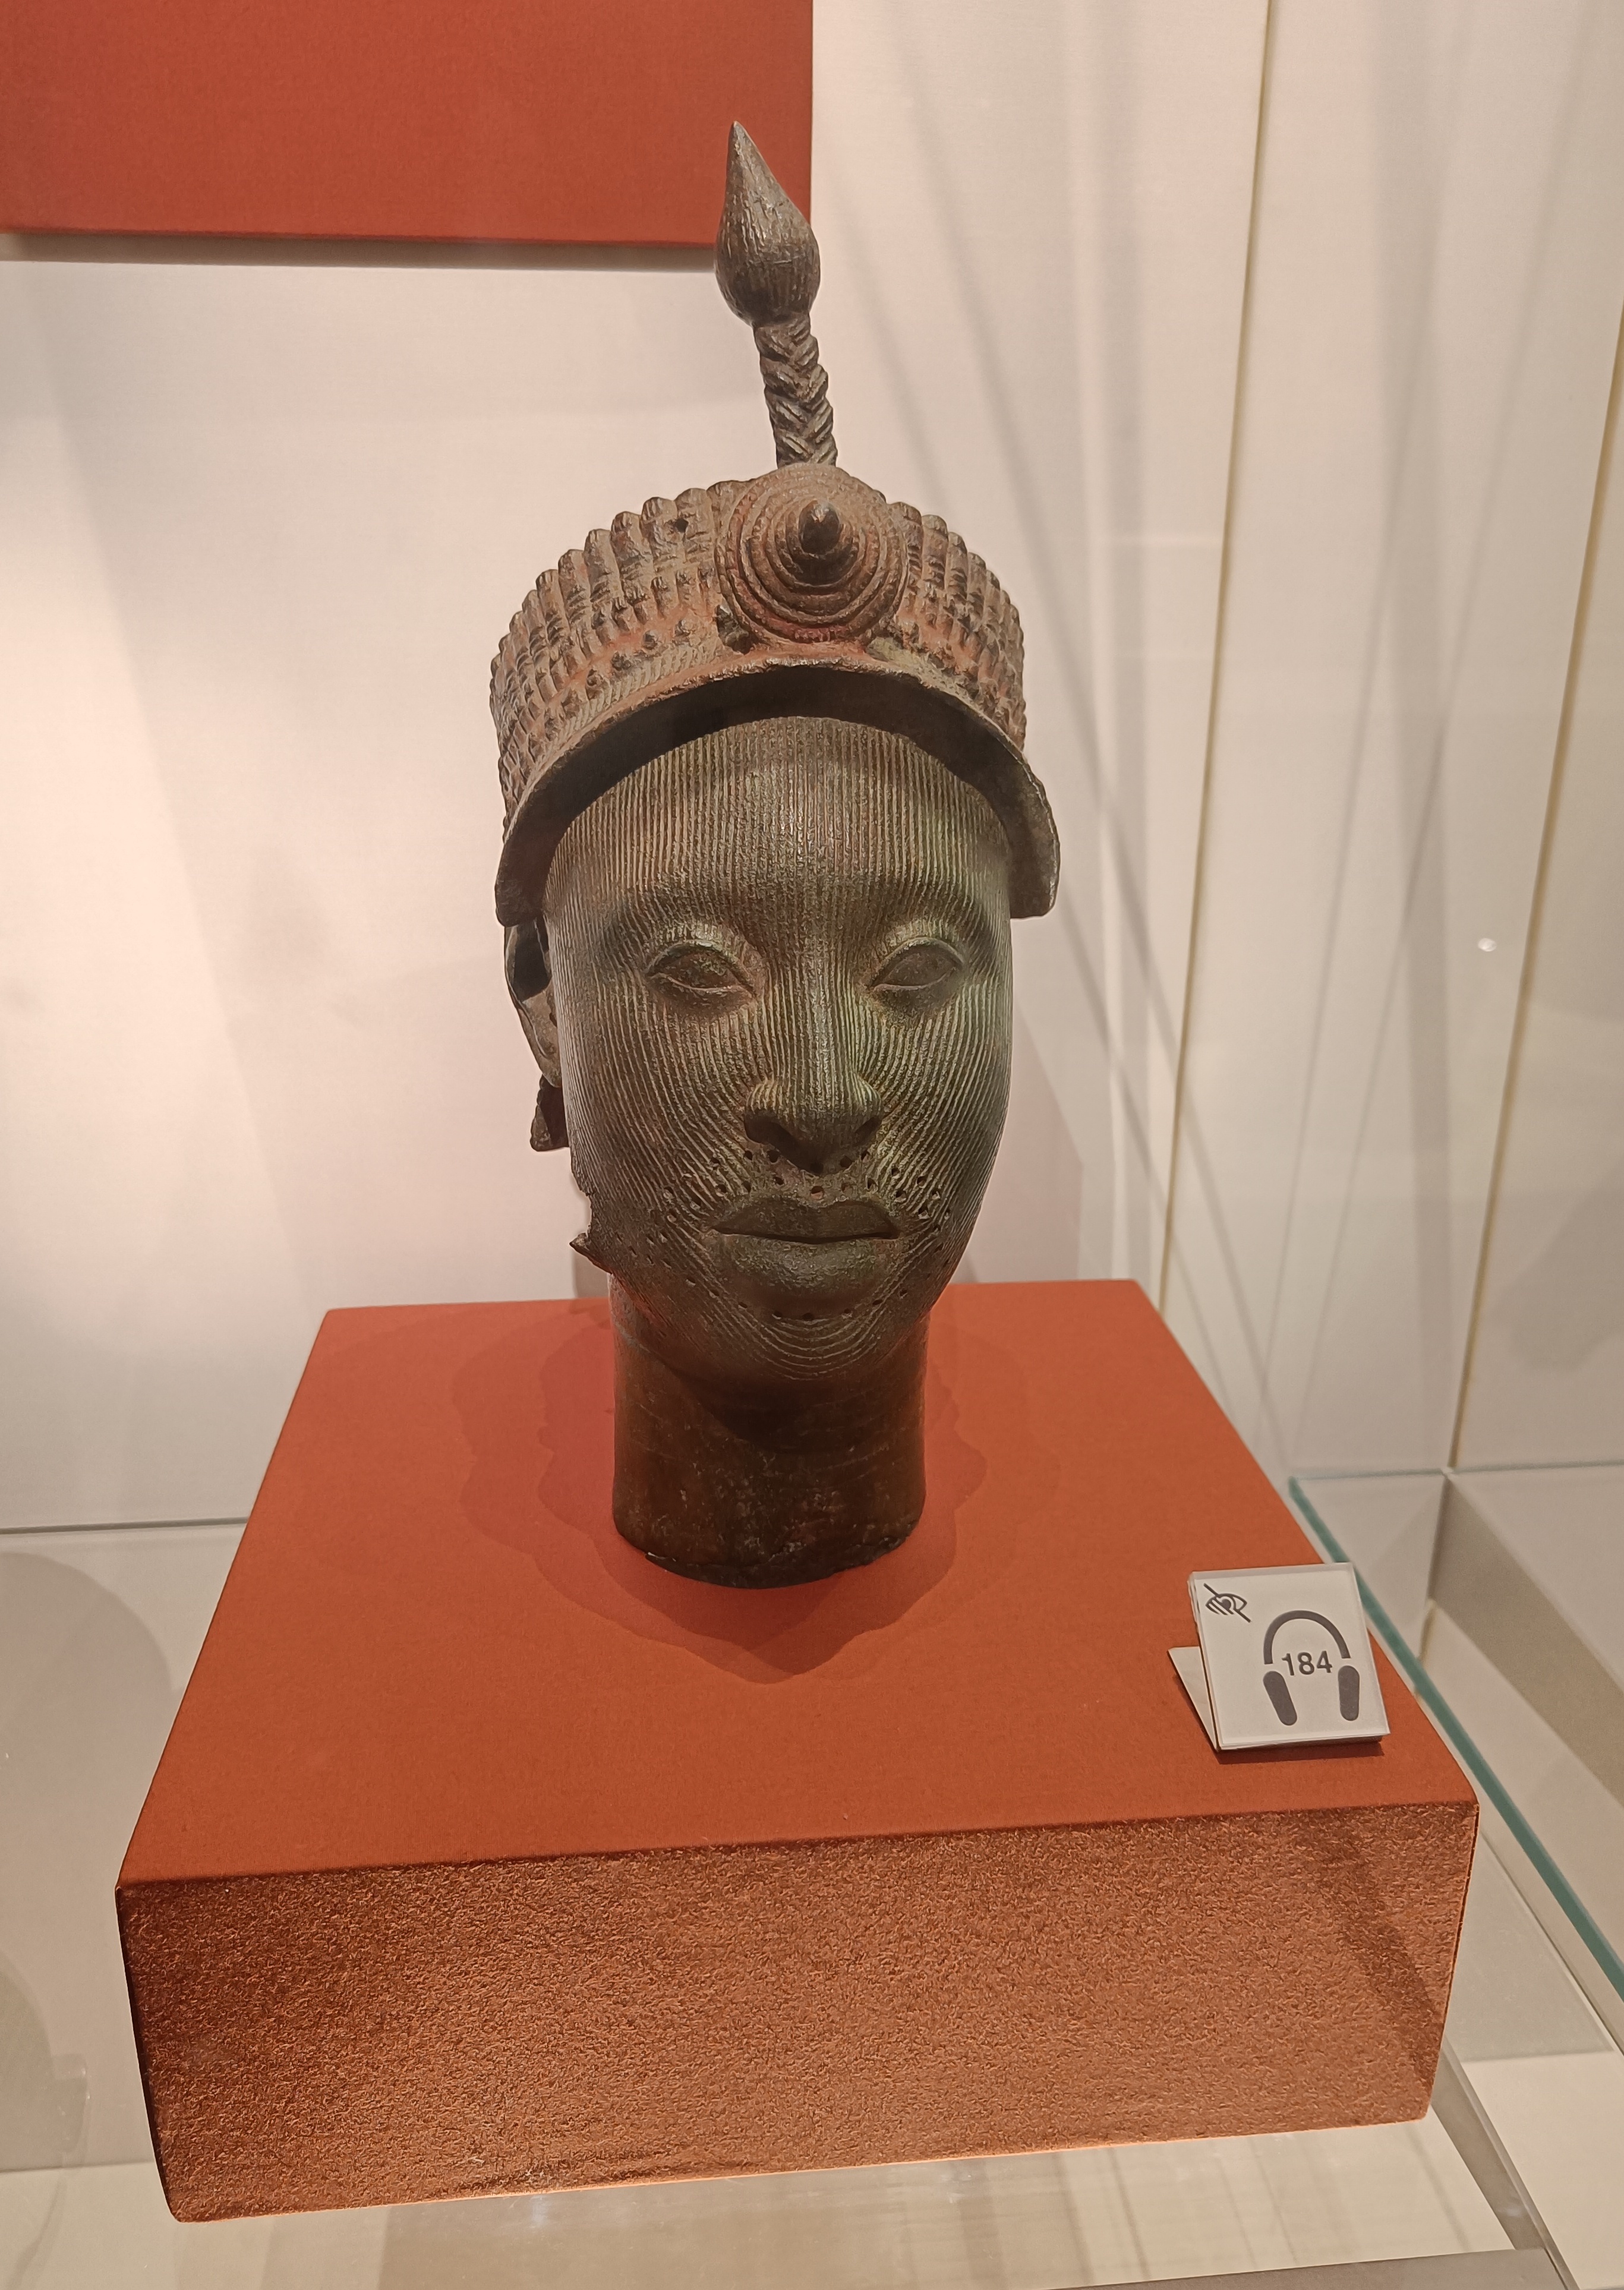 Image 1: The Ifẹ̀ head exported by journalist Henry Maclear Bate in 1939, now on display at the British Museum. Photograph by Tomos Llywelyn Evans.